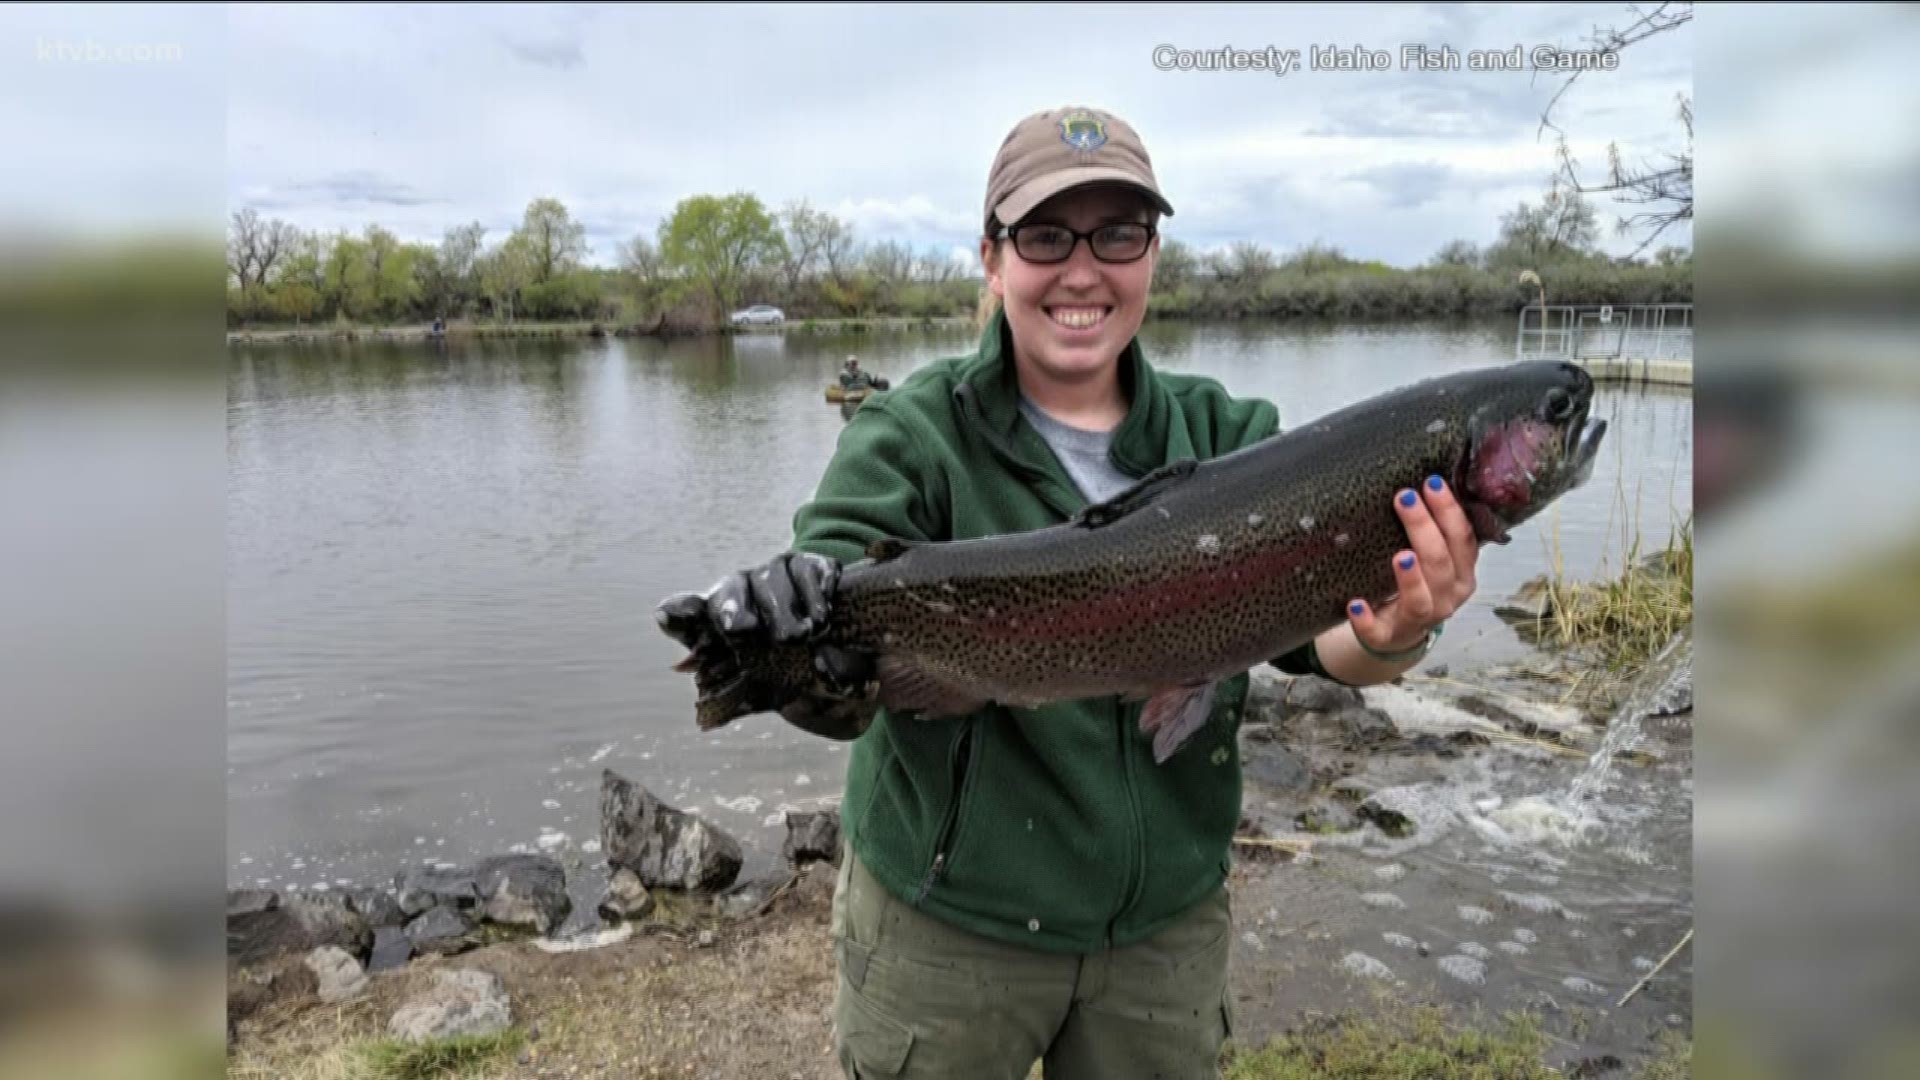 Idaho Fish and Game is stocking big trout in Magic Valley ponds